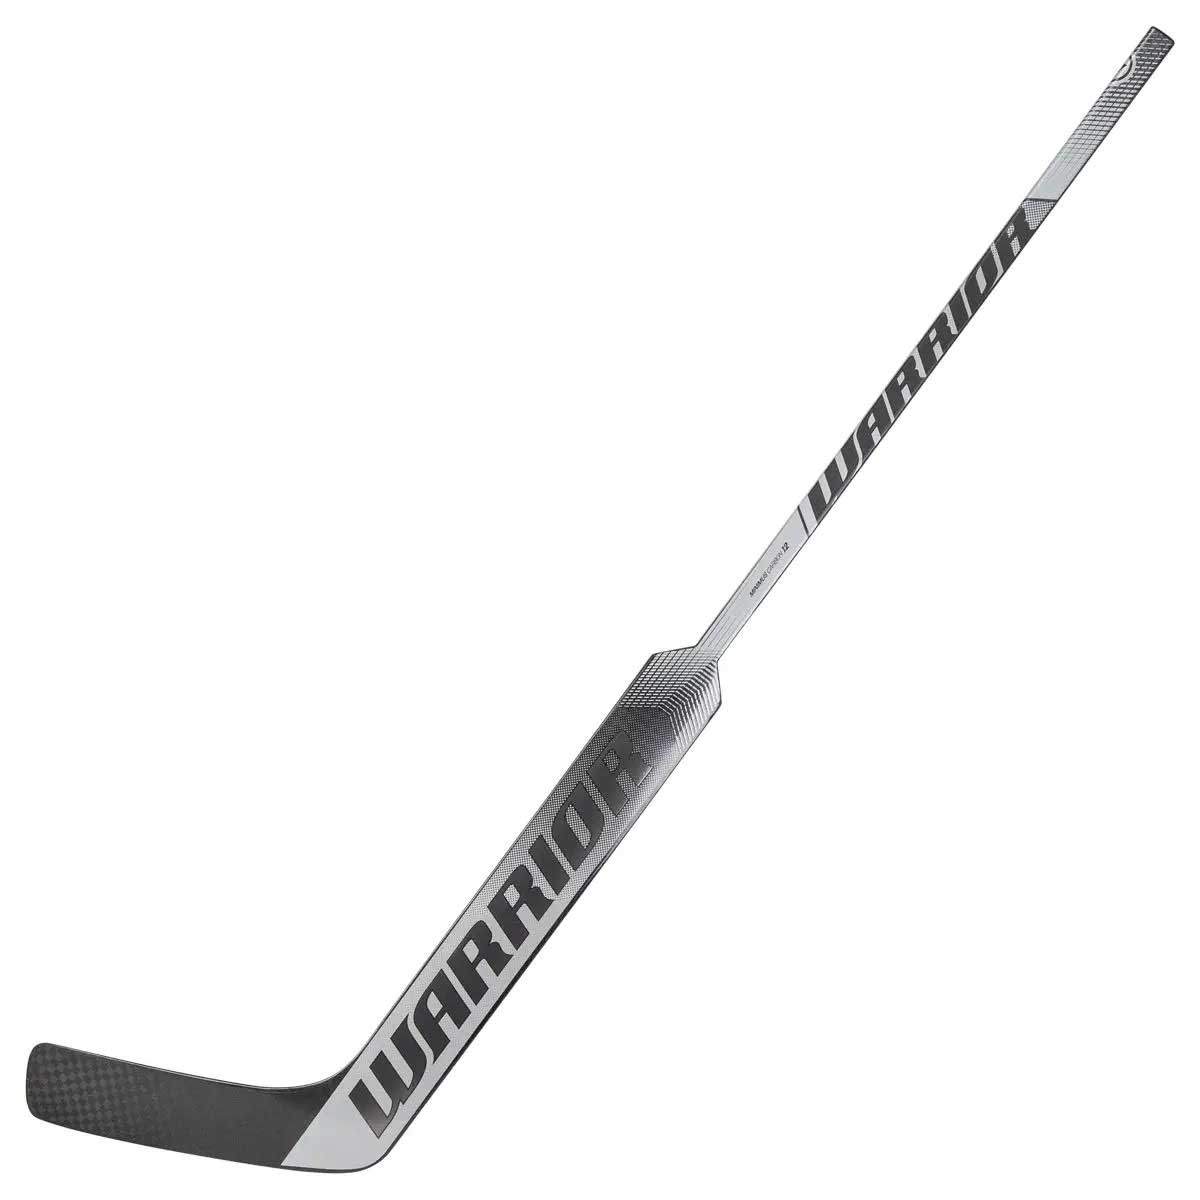 Picture of the silver Warrior Ritual V2 Pro Ice Hockey Goalie Stick (Senior)